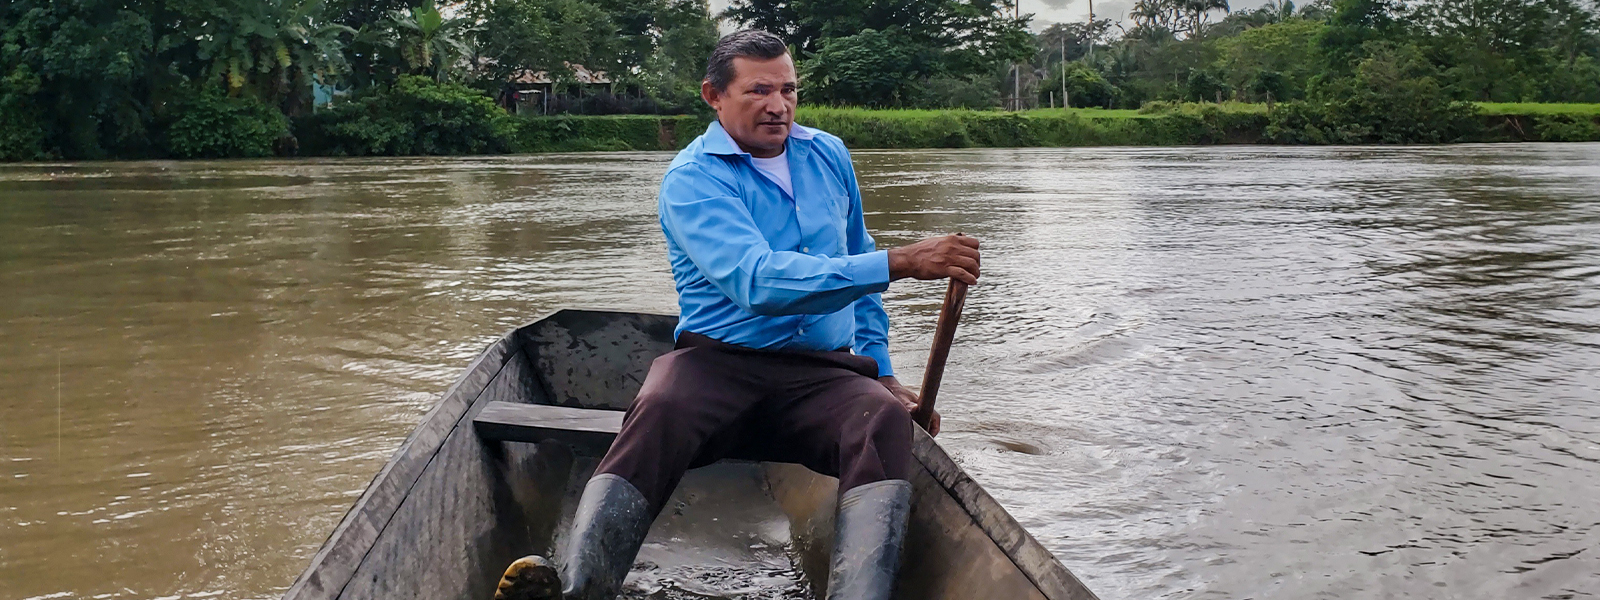 Brazilian Christian missionary paddles across a river in a wooden boat